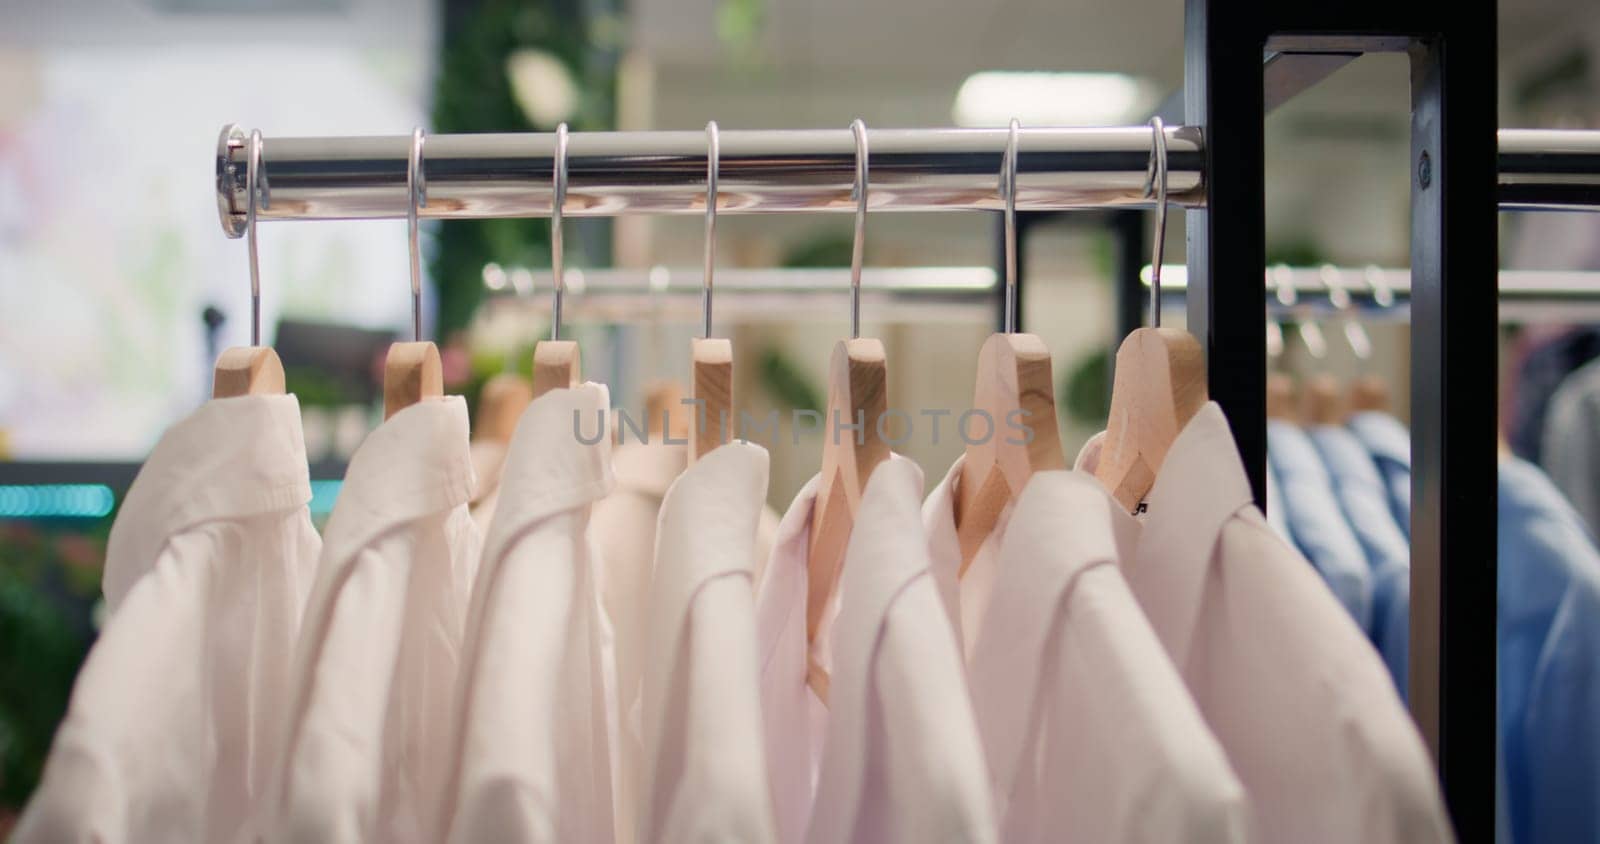 White shirts in clothing store by DCStudio